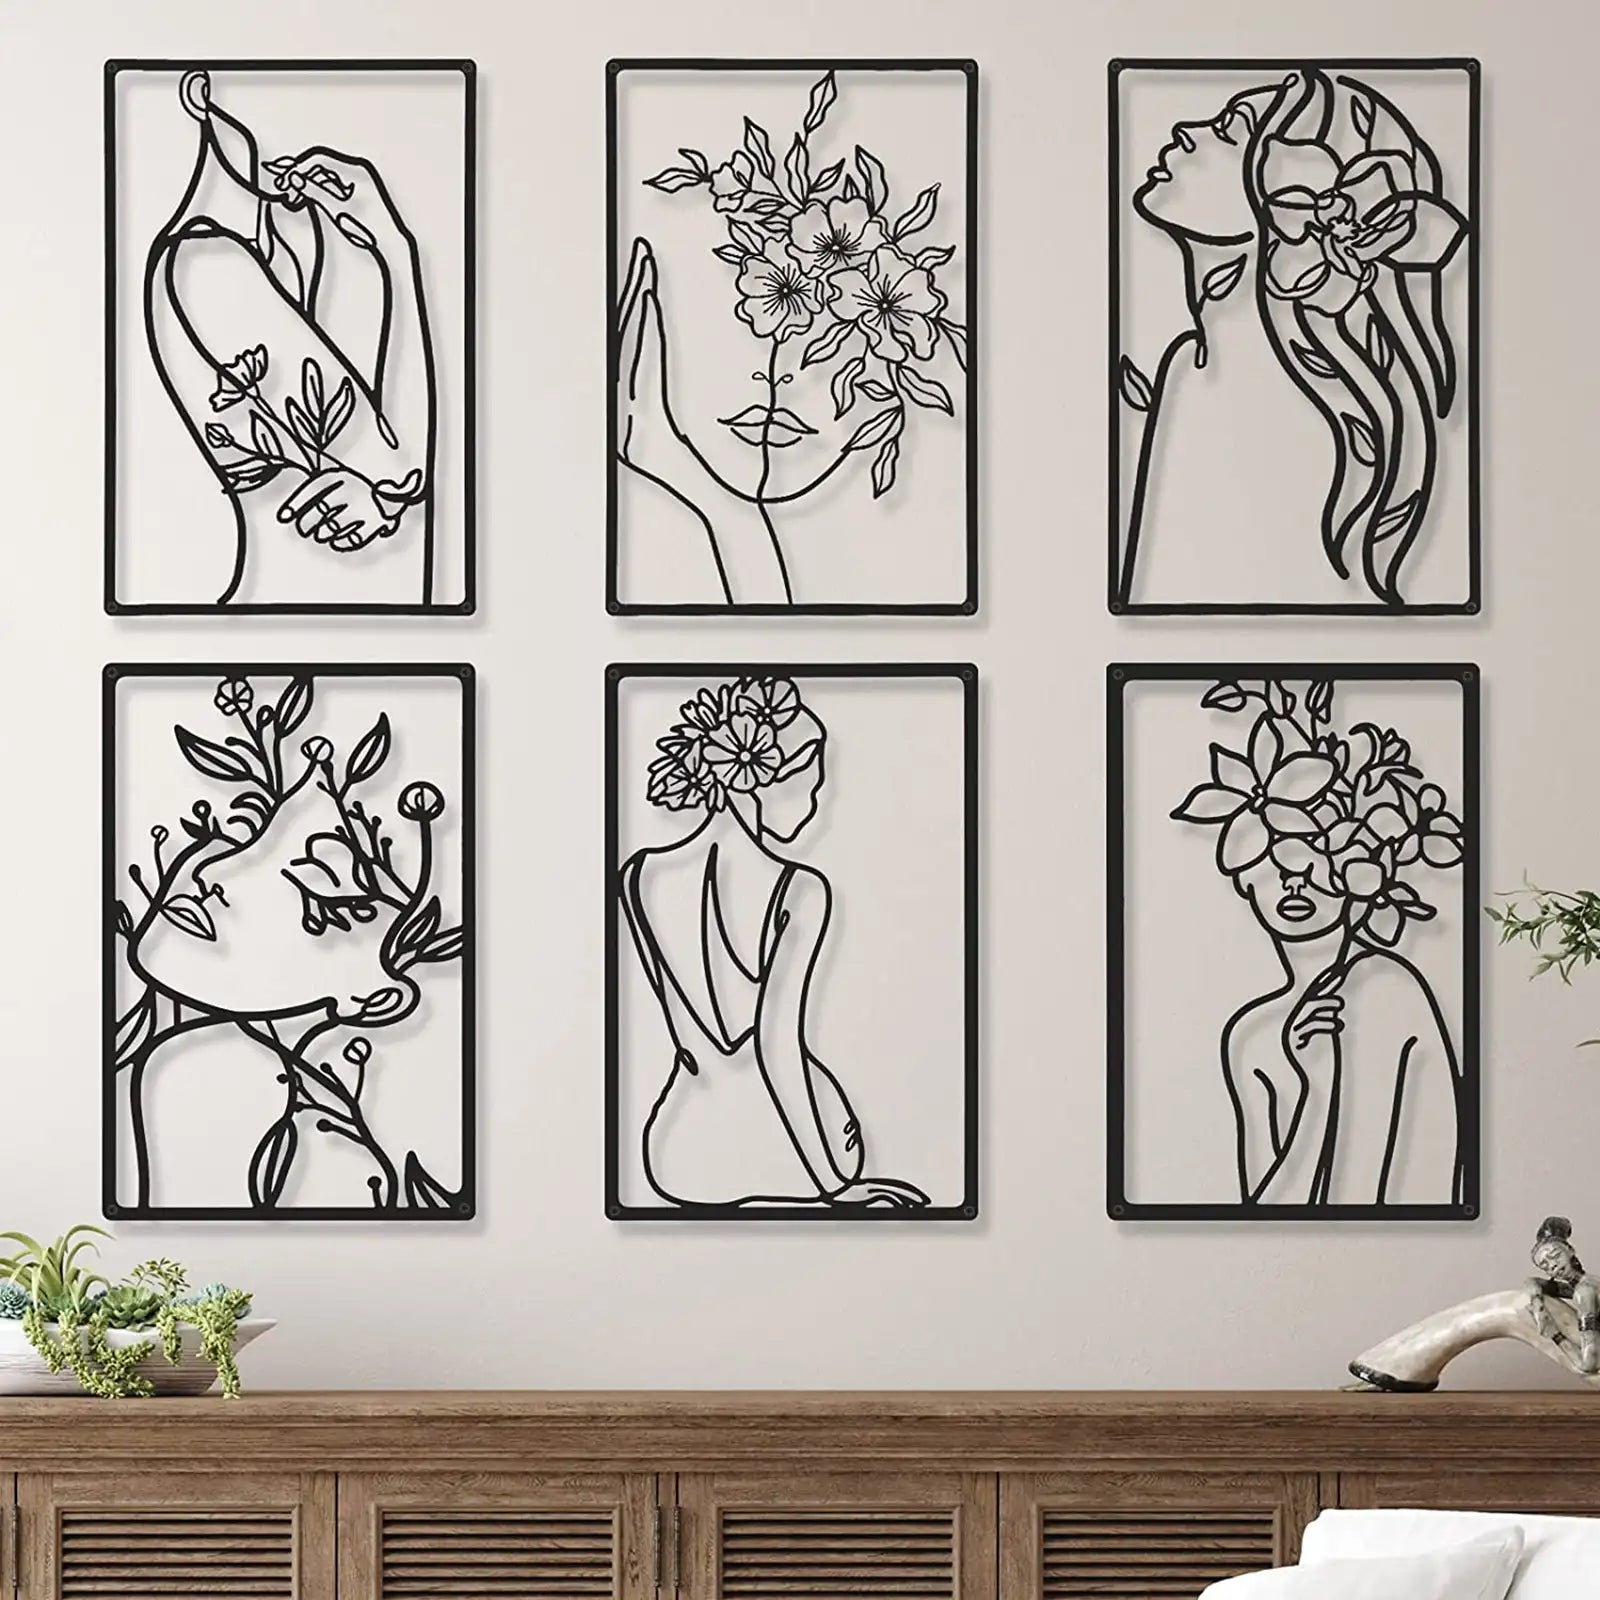 6 Pieces Black Metal Wall Decor Modern Minimalist Abstract Woman Wall Art Aesthetic Female Wall Sculpture Line Drawing Hanging Art Minimalist Decor for Kitchen Bedroom Bathroom Living Room Wall Decor